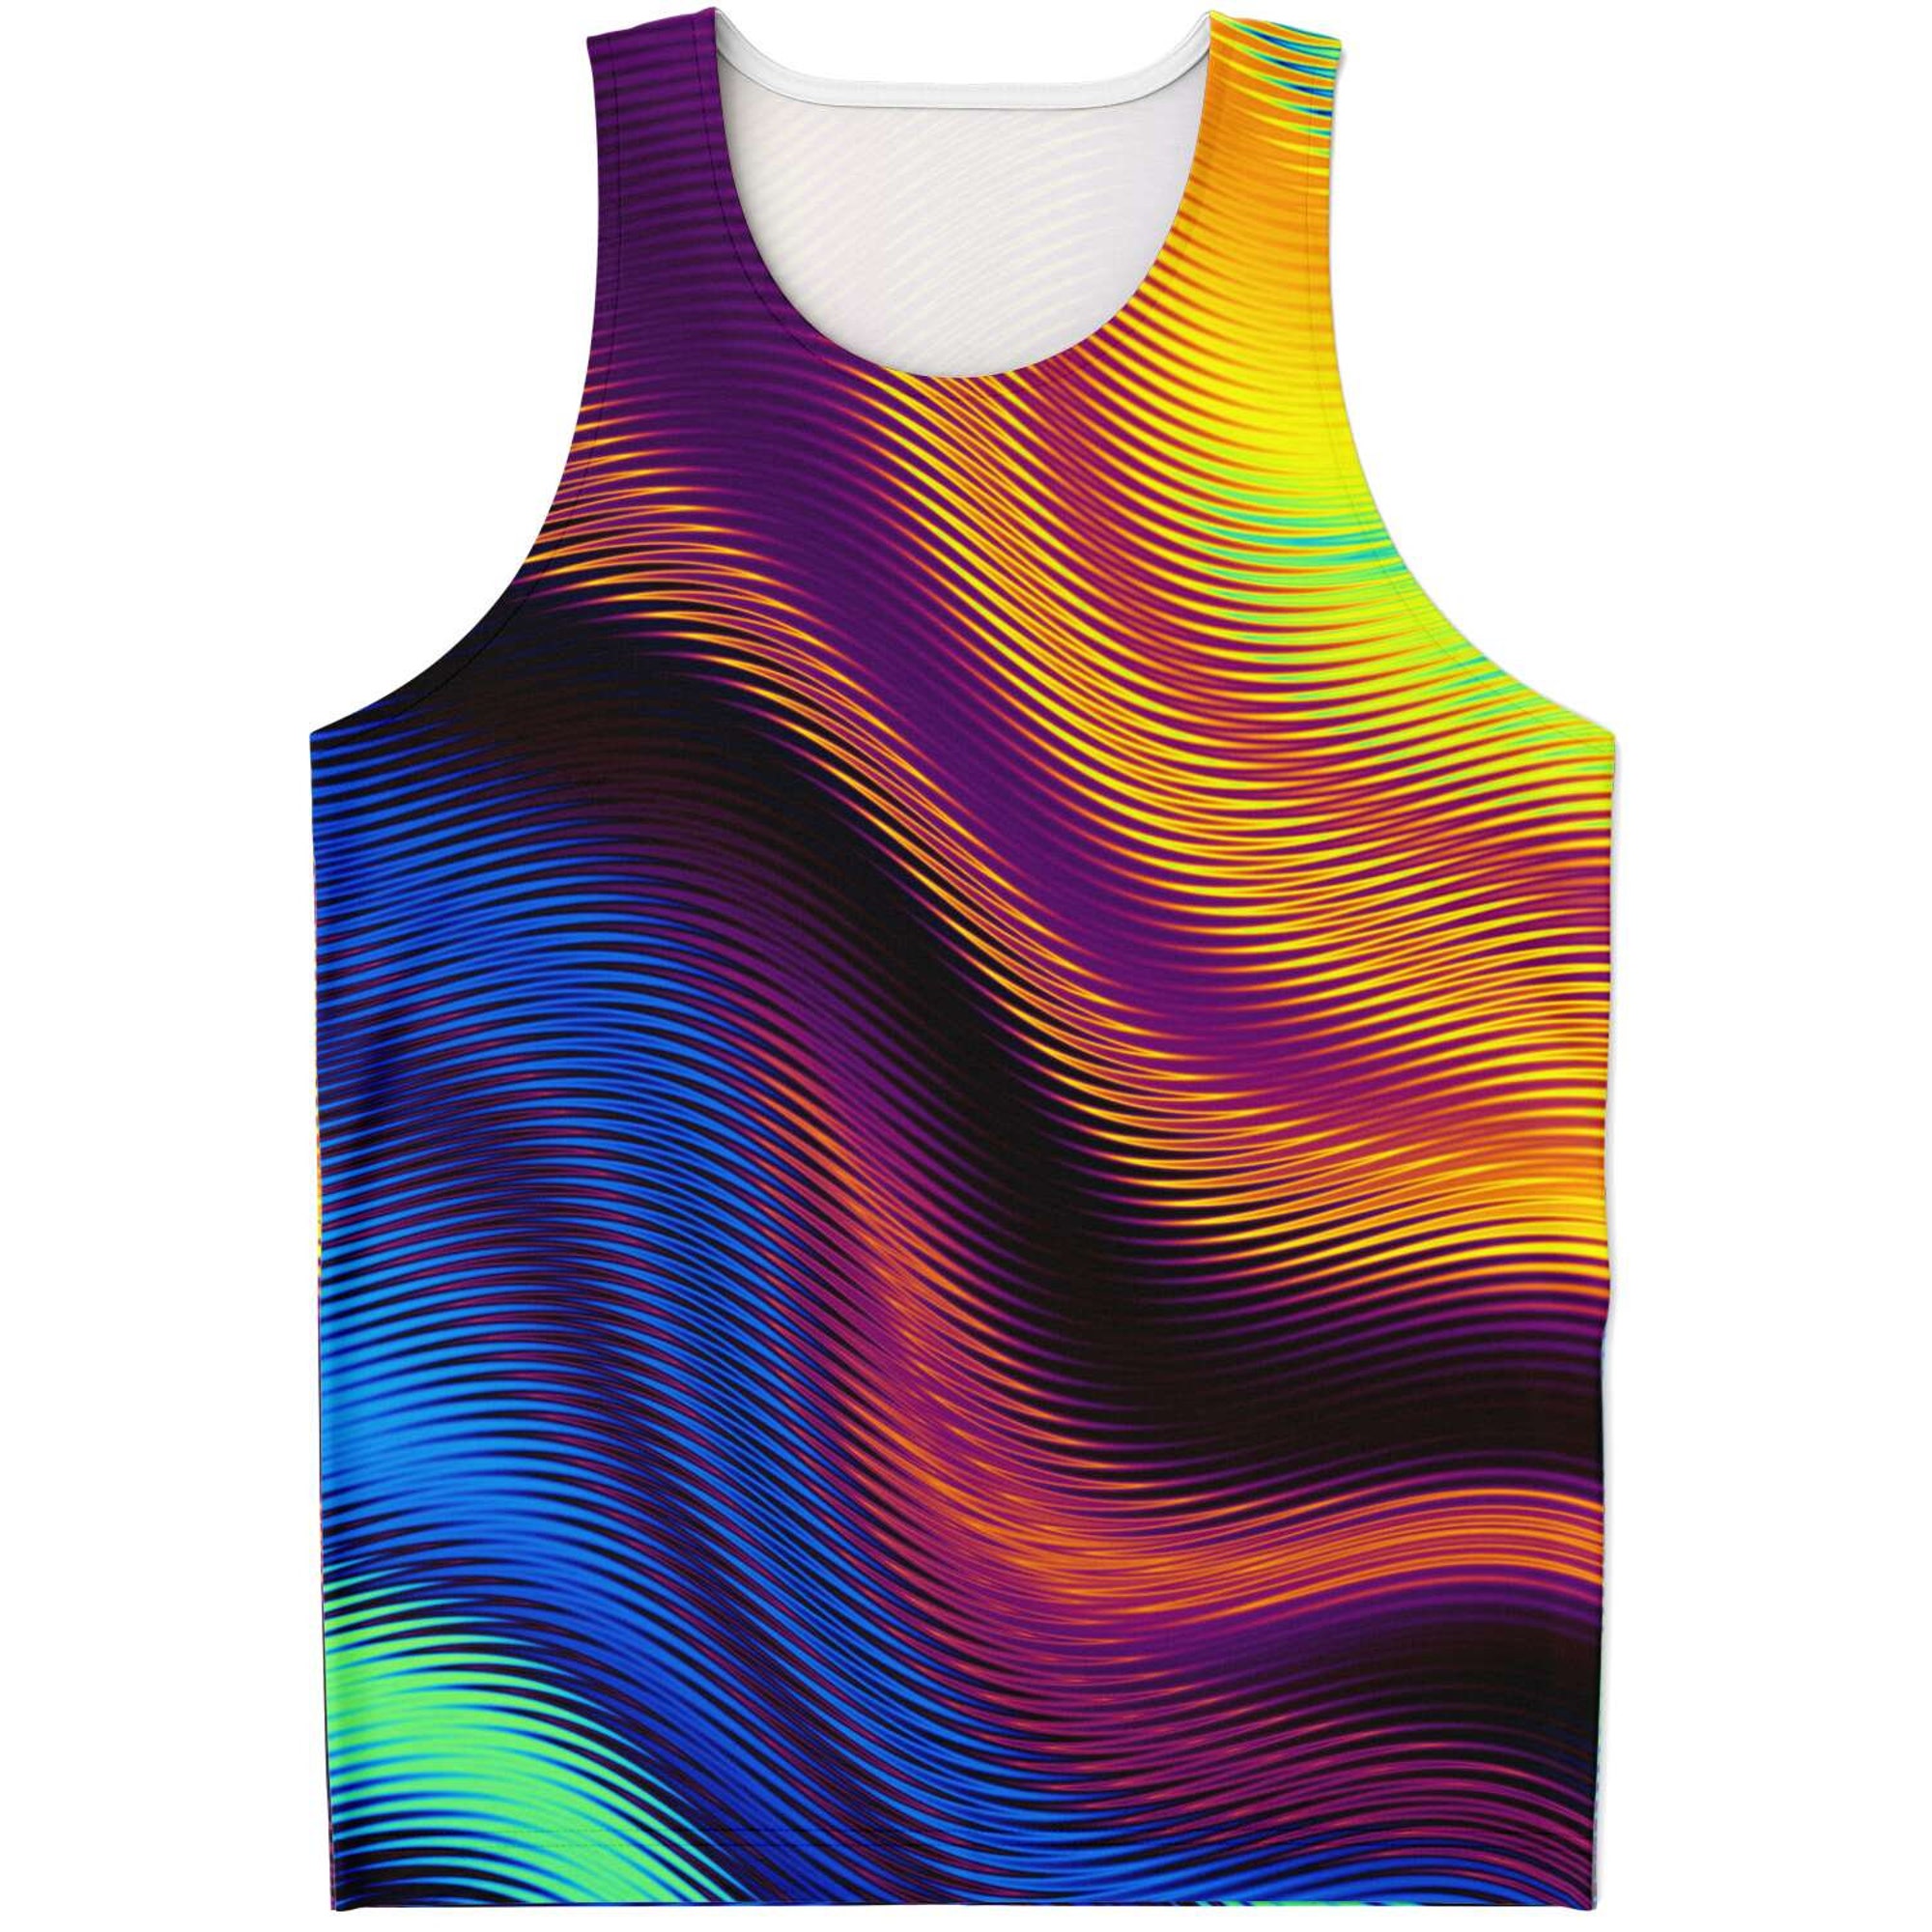 Discover Psychedelic Liquid Waves Abstract Alien 3D Tank Top